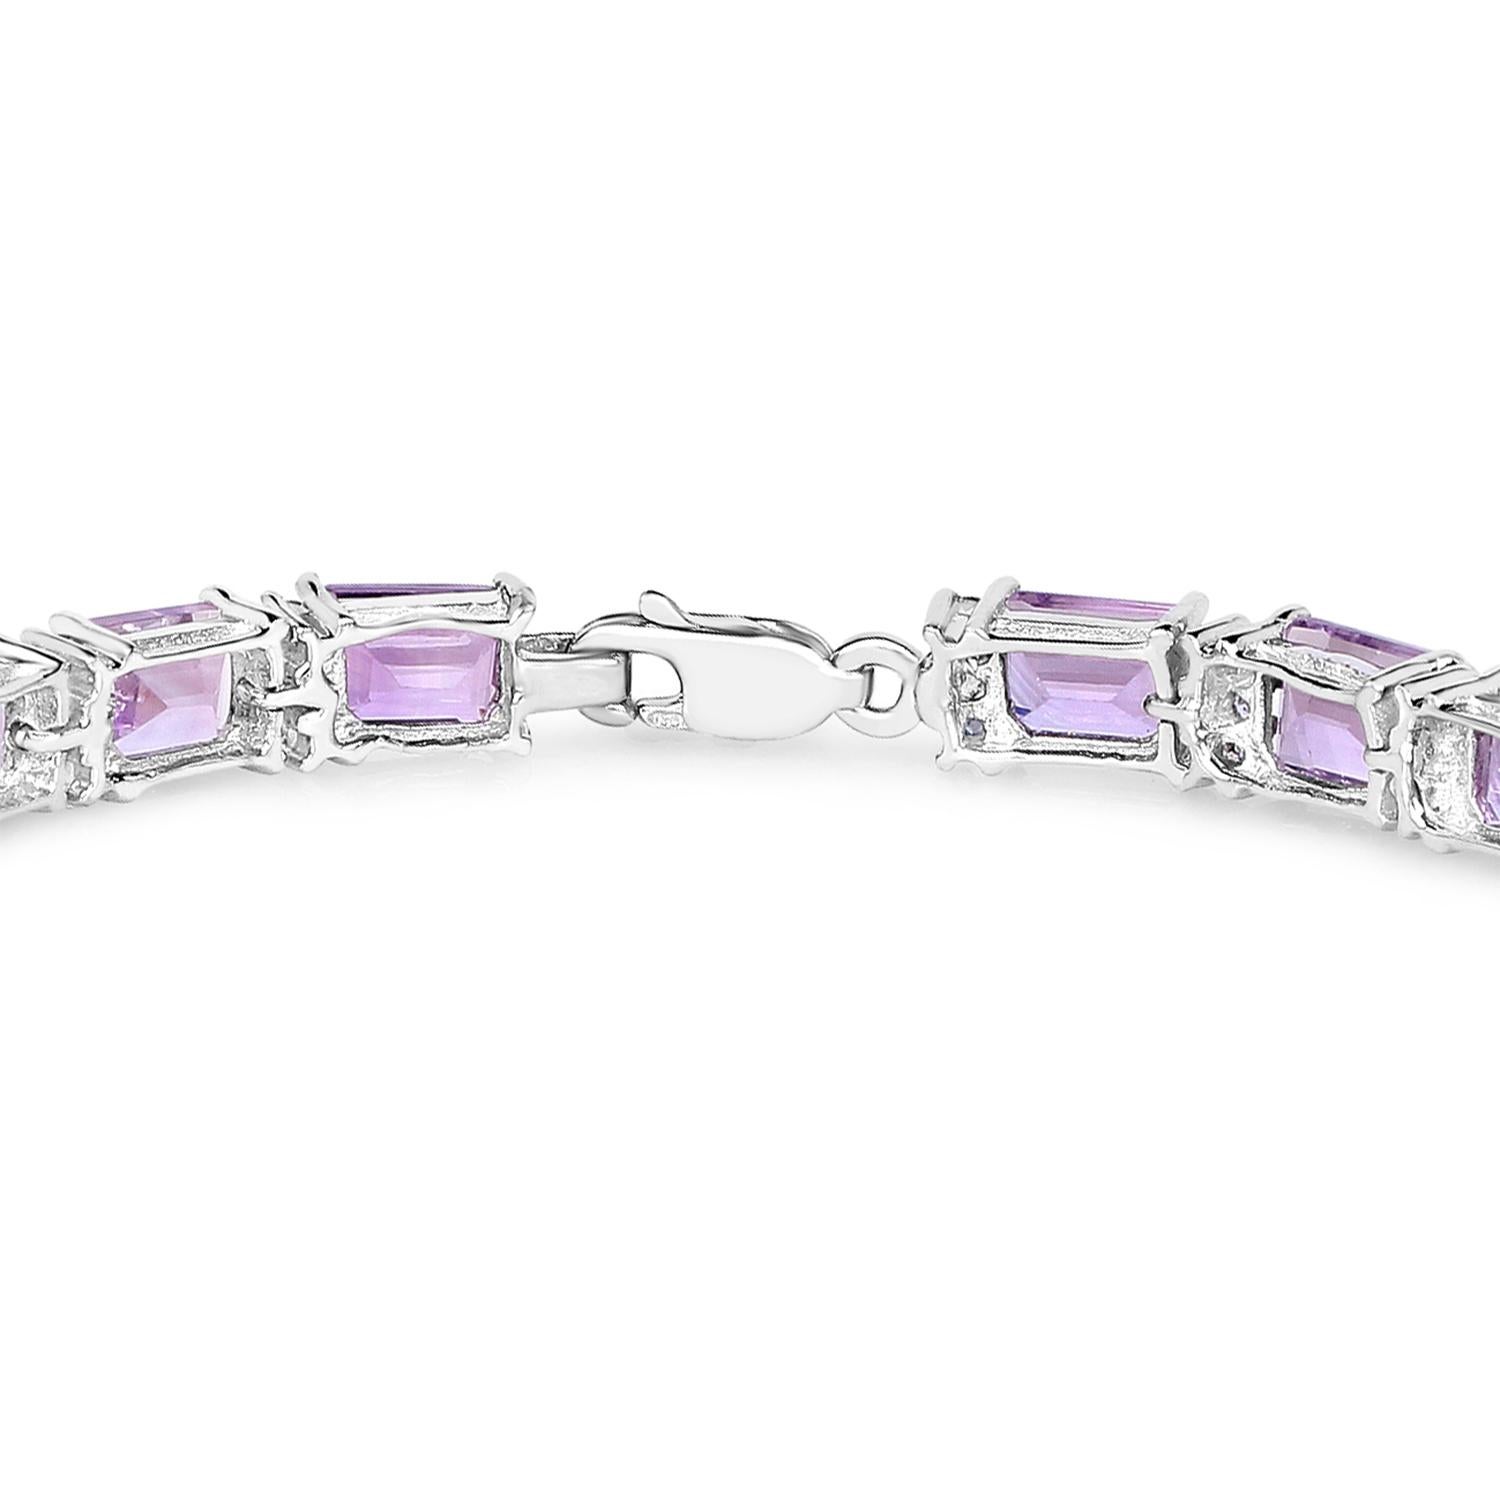 Amethyst Bracelet With Tanzanite 19.19 Carats Rhodium Plated Sterling Silver In Excellent Condition For Sale In Laguna Niguel, CA